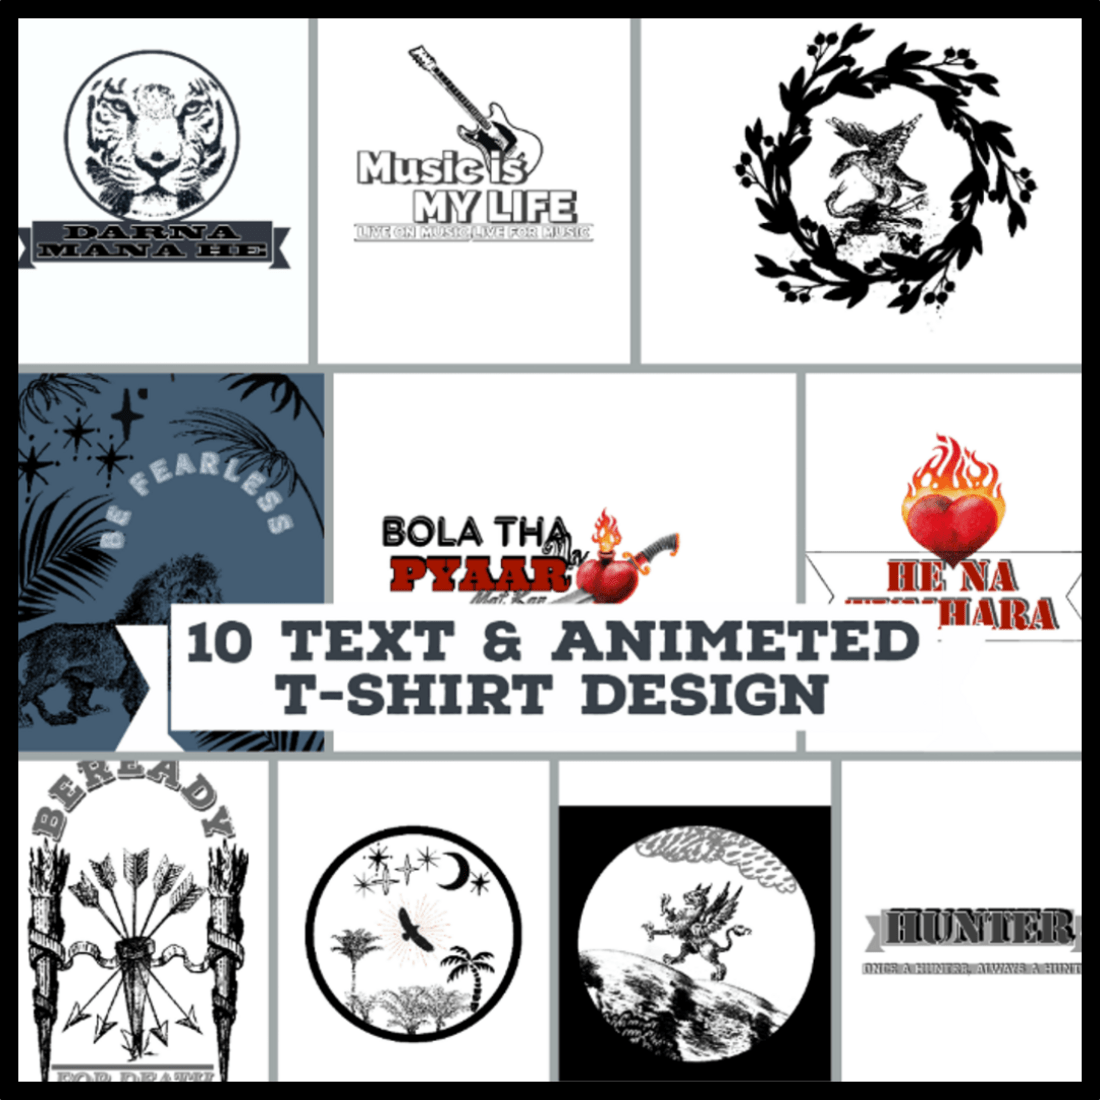 10 text & animated t shirt design cover image.